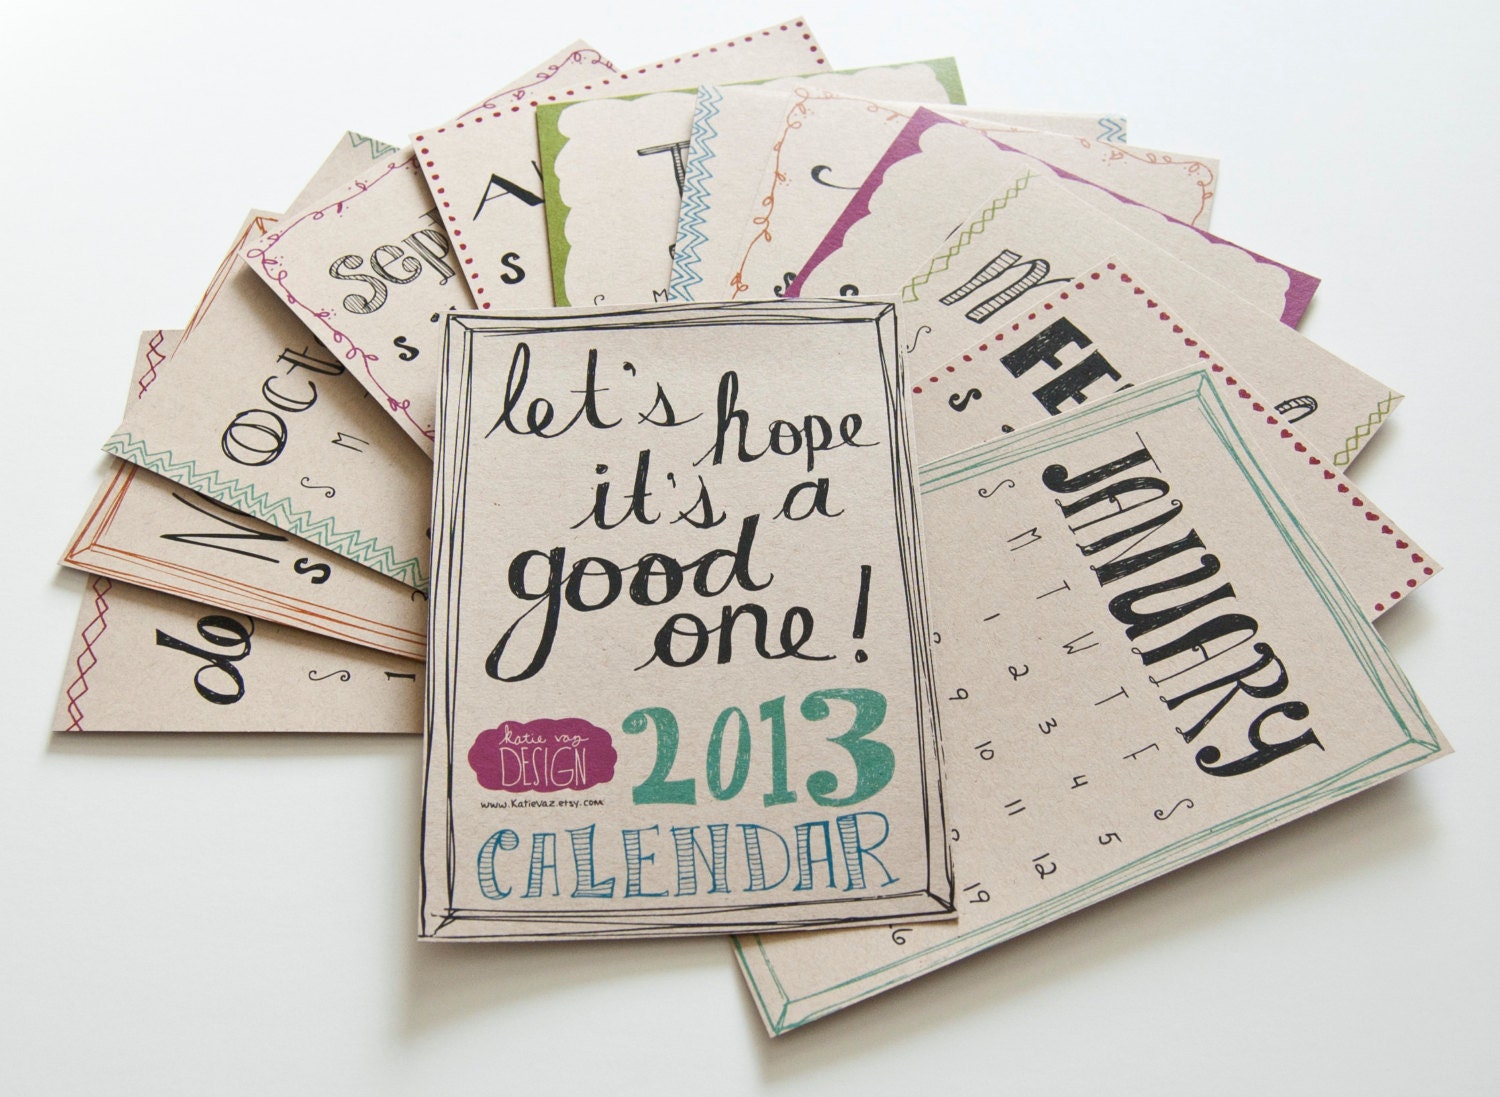 2013 calendar. hand drawn and illustrated. color. kraft paper. frameable. let's hope it's a good one. - katievaz